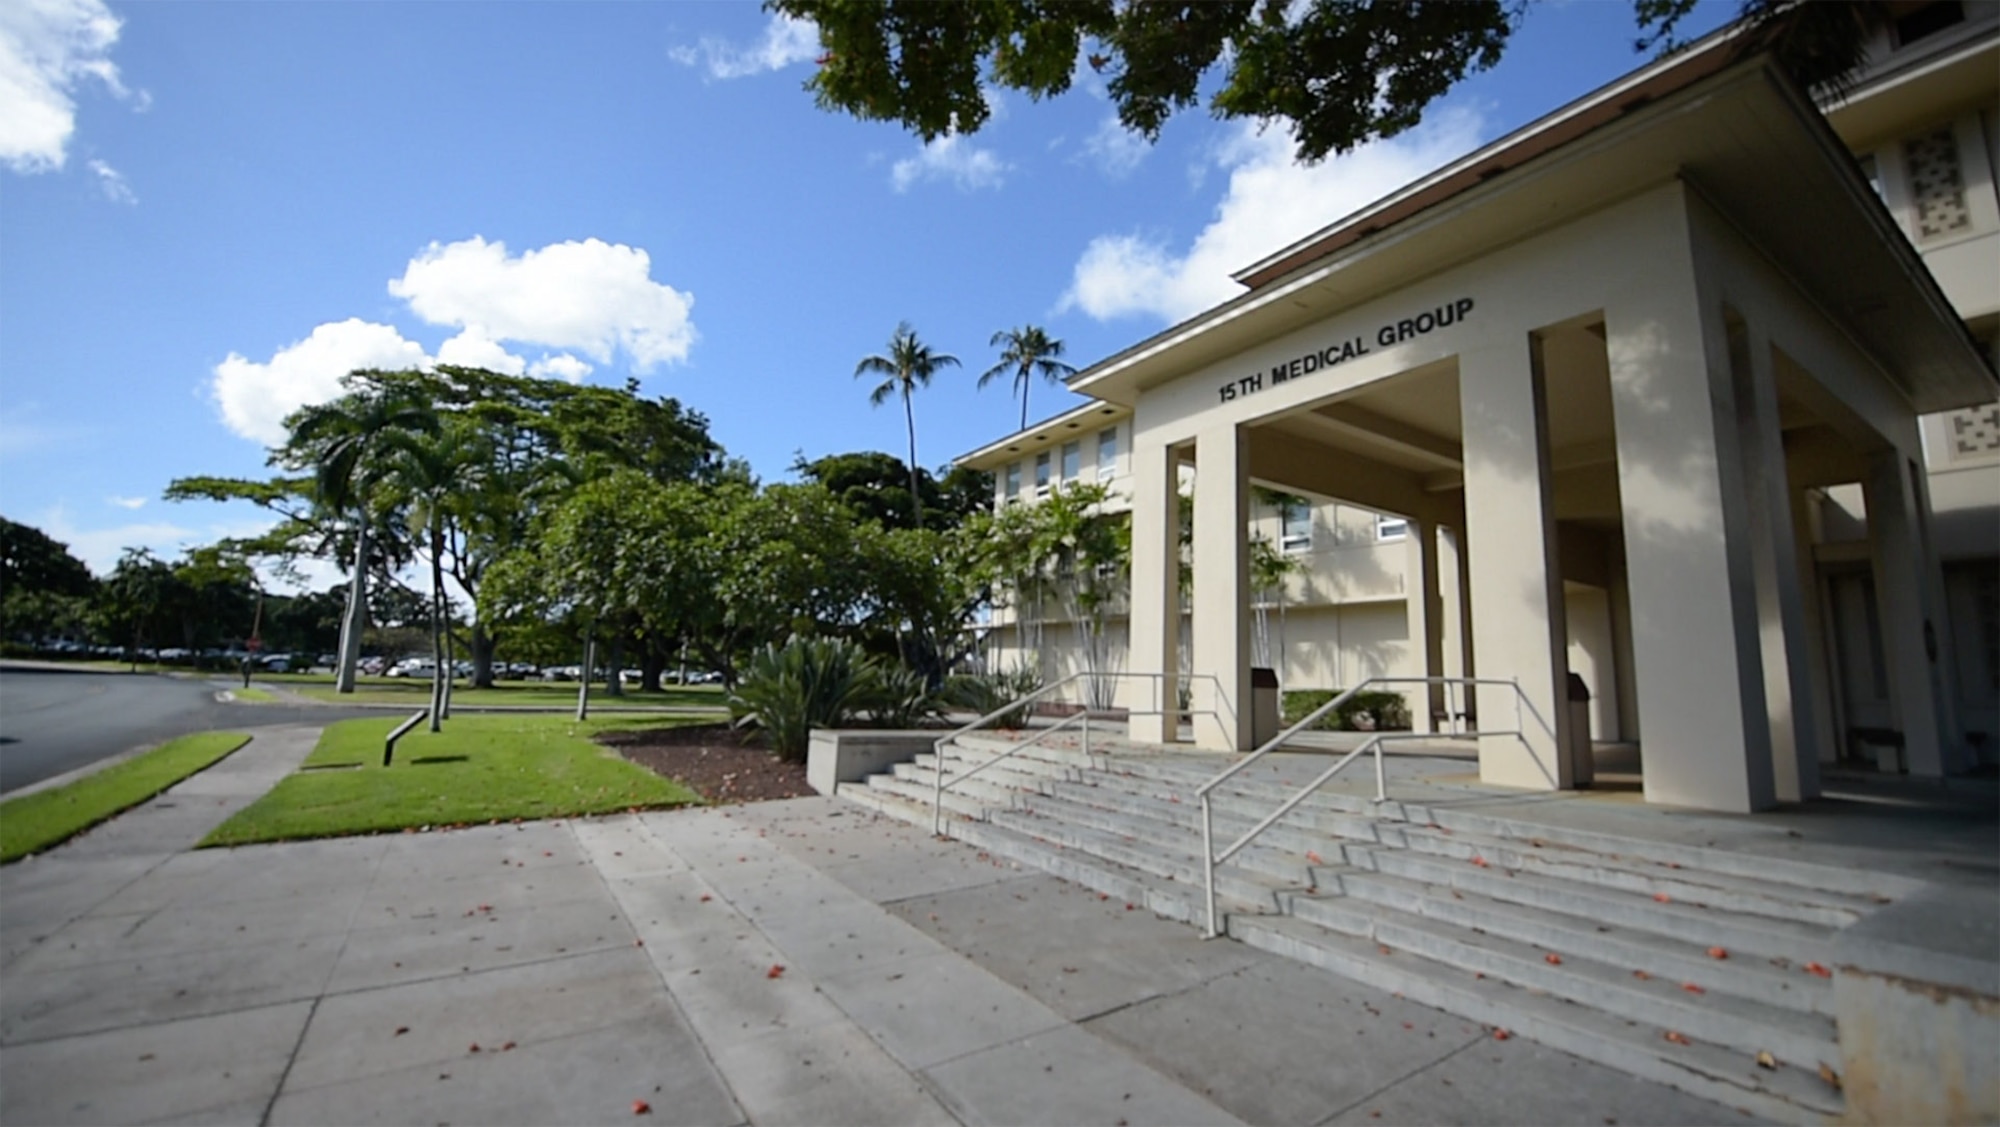 The William R. Schick Clinic at Hickam Air Force Base